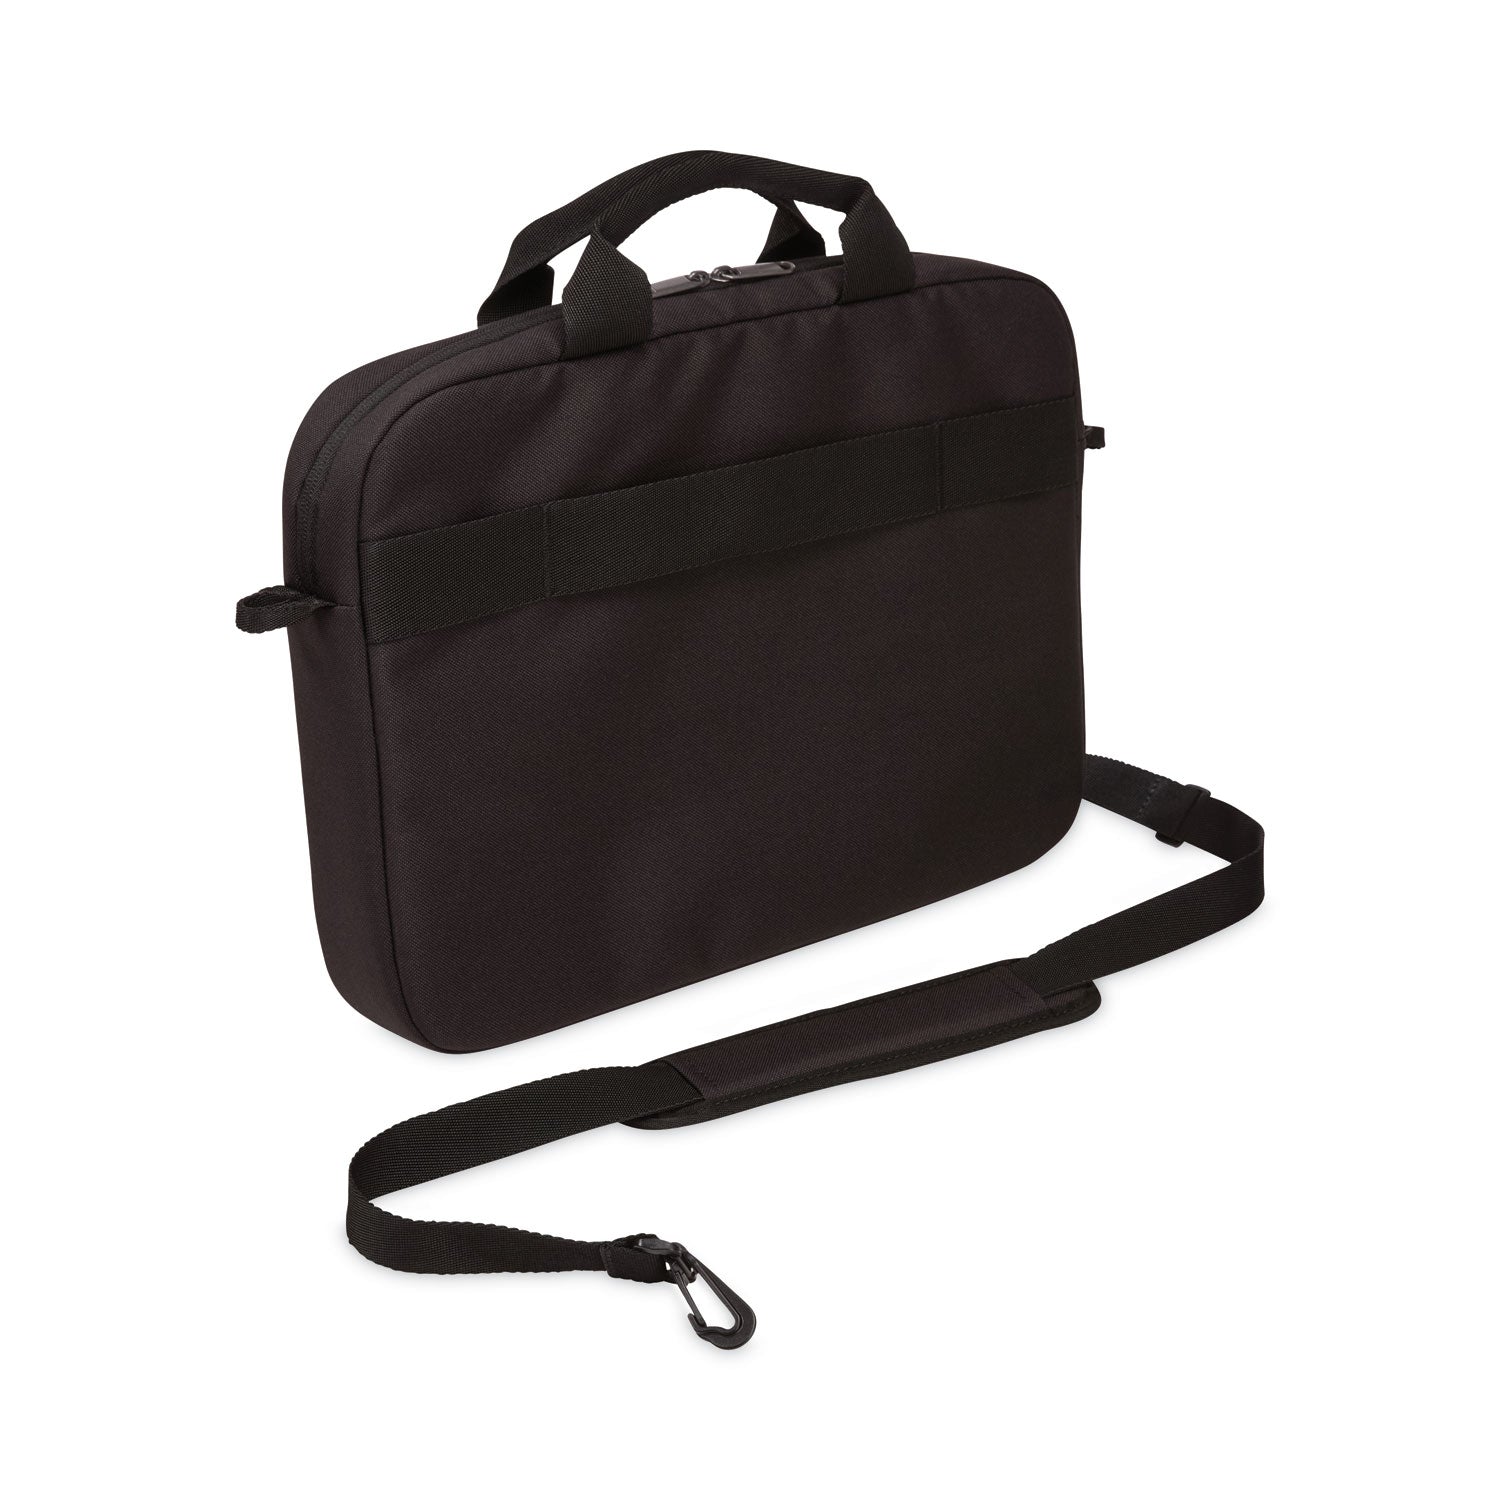 advantage-laptop-attache-fits-devices-up-to-14-polyester-146-x-28-x-13-black_clg3203986 - 3